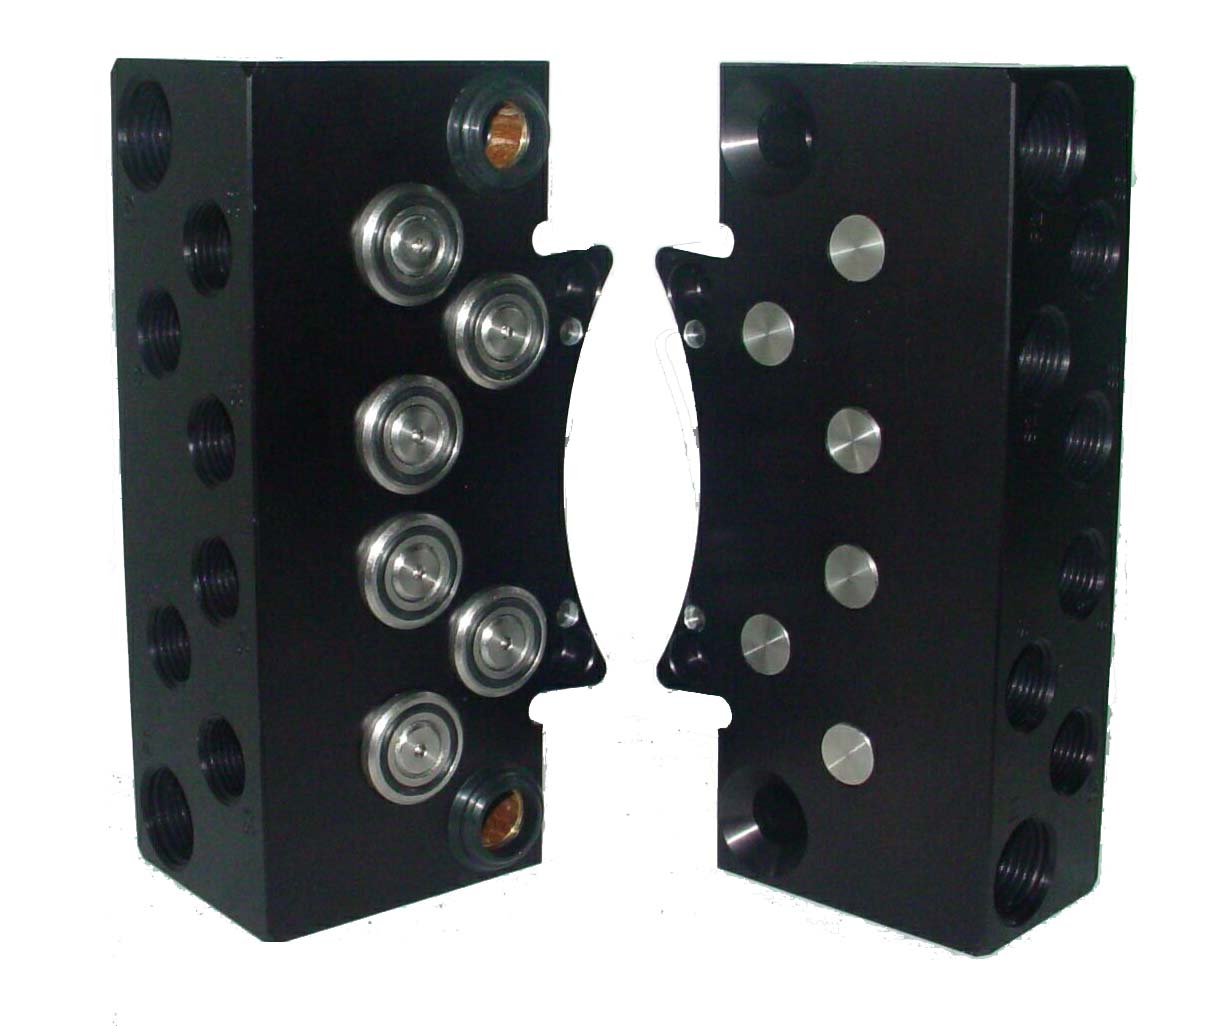 AN2 Modules (Master and Tool) shown